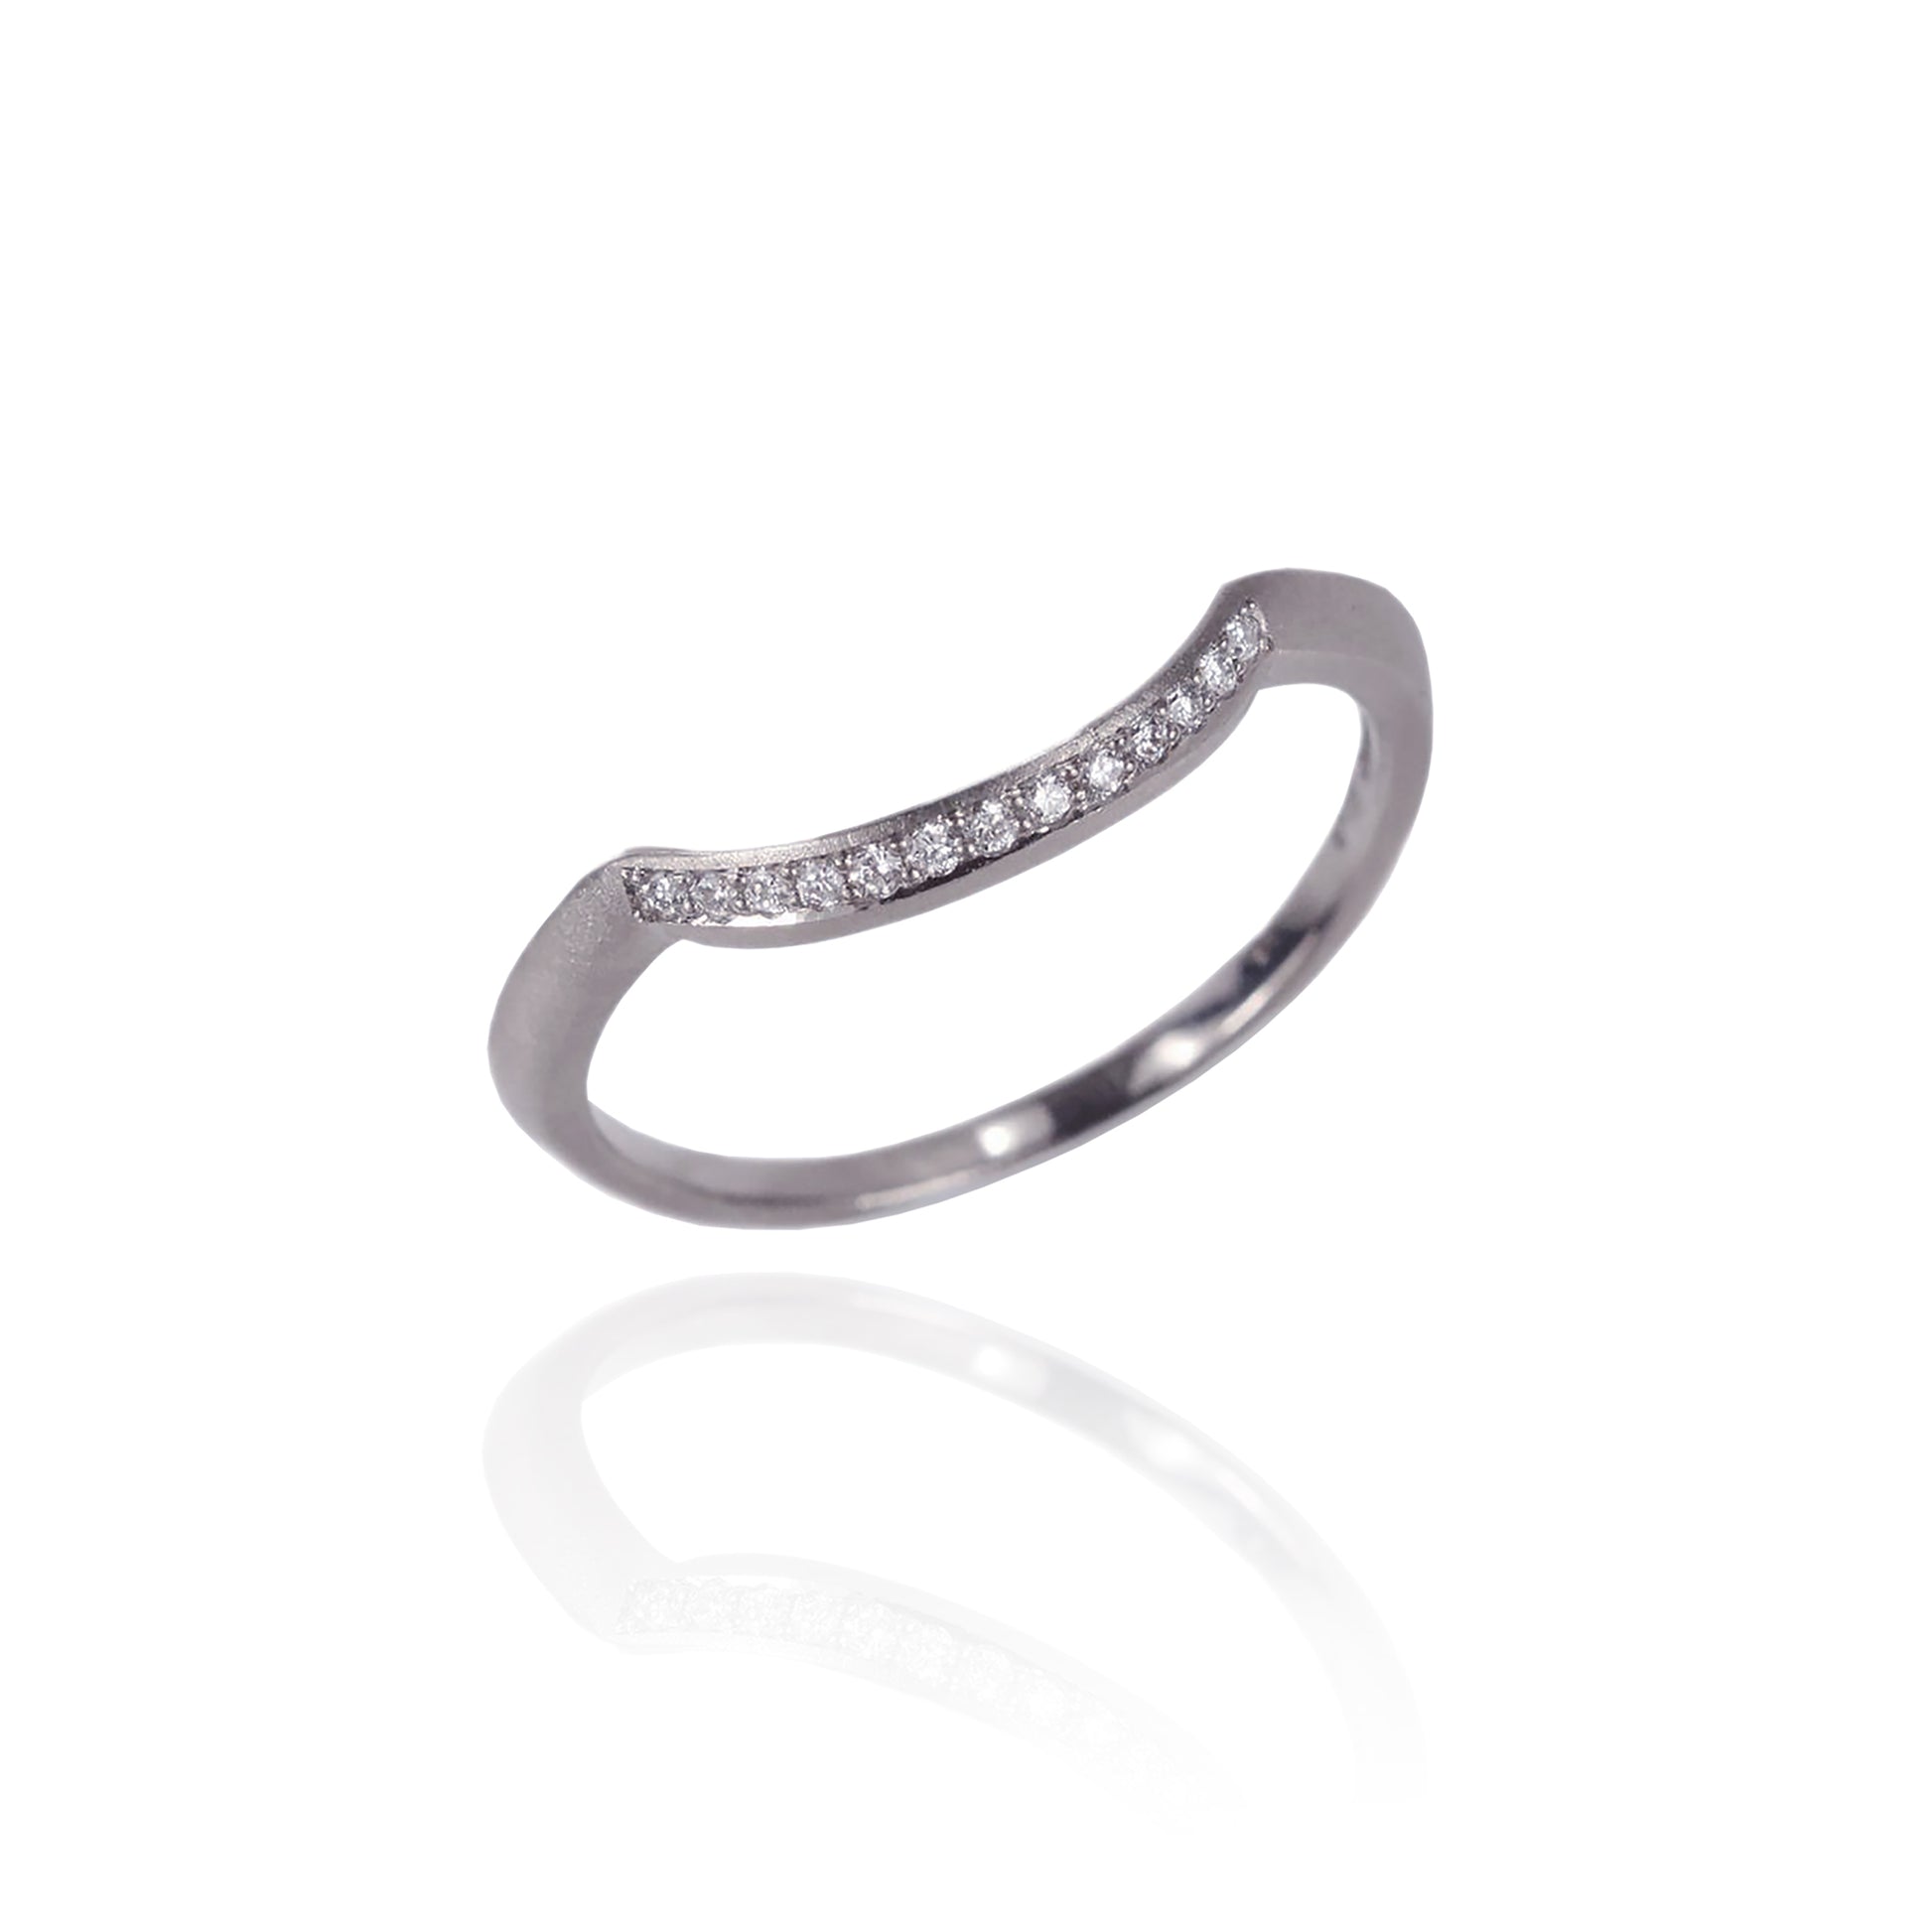 Orme-Brown Contemporary Fine Jewellery Ethical Cluster Engagement Wedding Eternity Ring Set in sustainable recycled 18ct yellow and white gold, old cut, Australian diamonds, knife edge